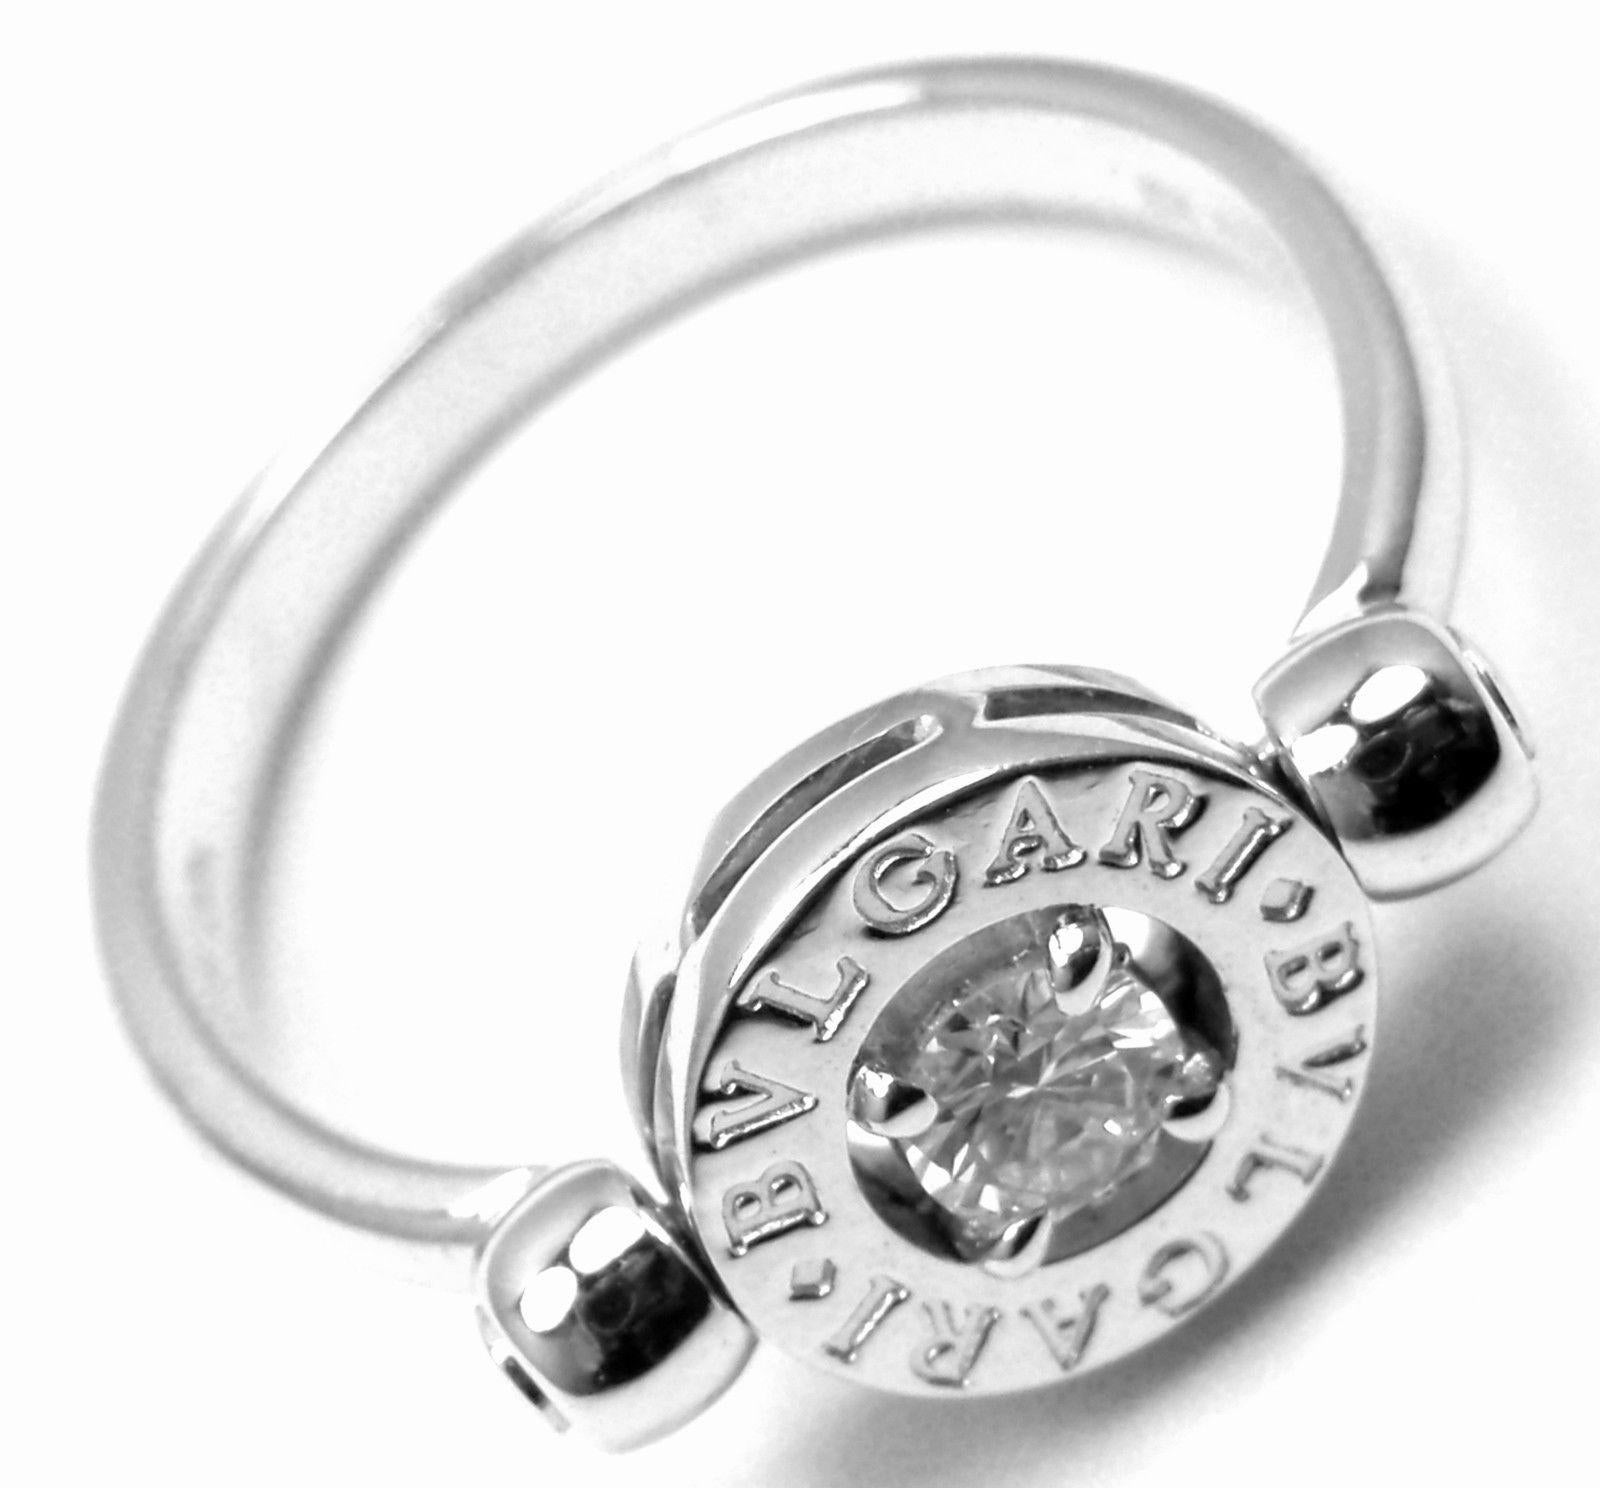 18k White Gold Diamond Flip Band Ring by Bulgari. 
With 1 Round brilliant cut diamonds VVS1 clarity, E color total weight approx. .25ct
Details:
Ring Size: 7
Weight: 5.1 grams
Width: 9mm
Stamped Hallmarks: Bvlgari, 750, Made In Italy, 2337AL
*Free